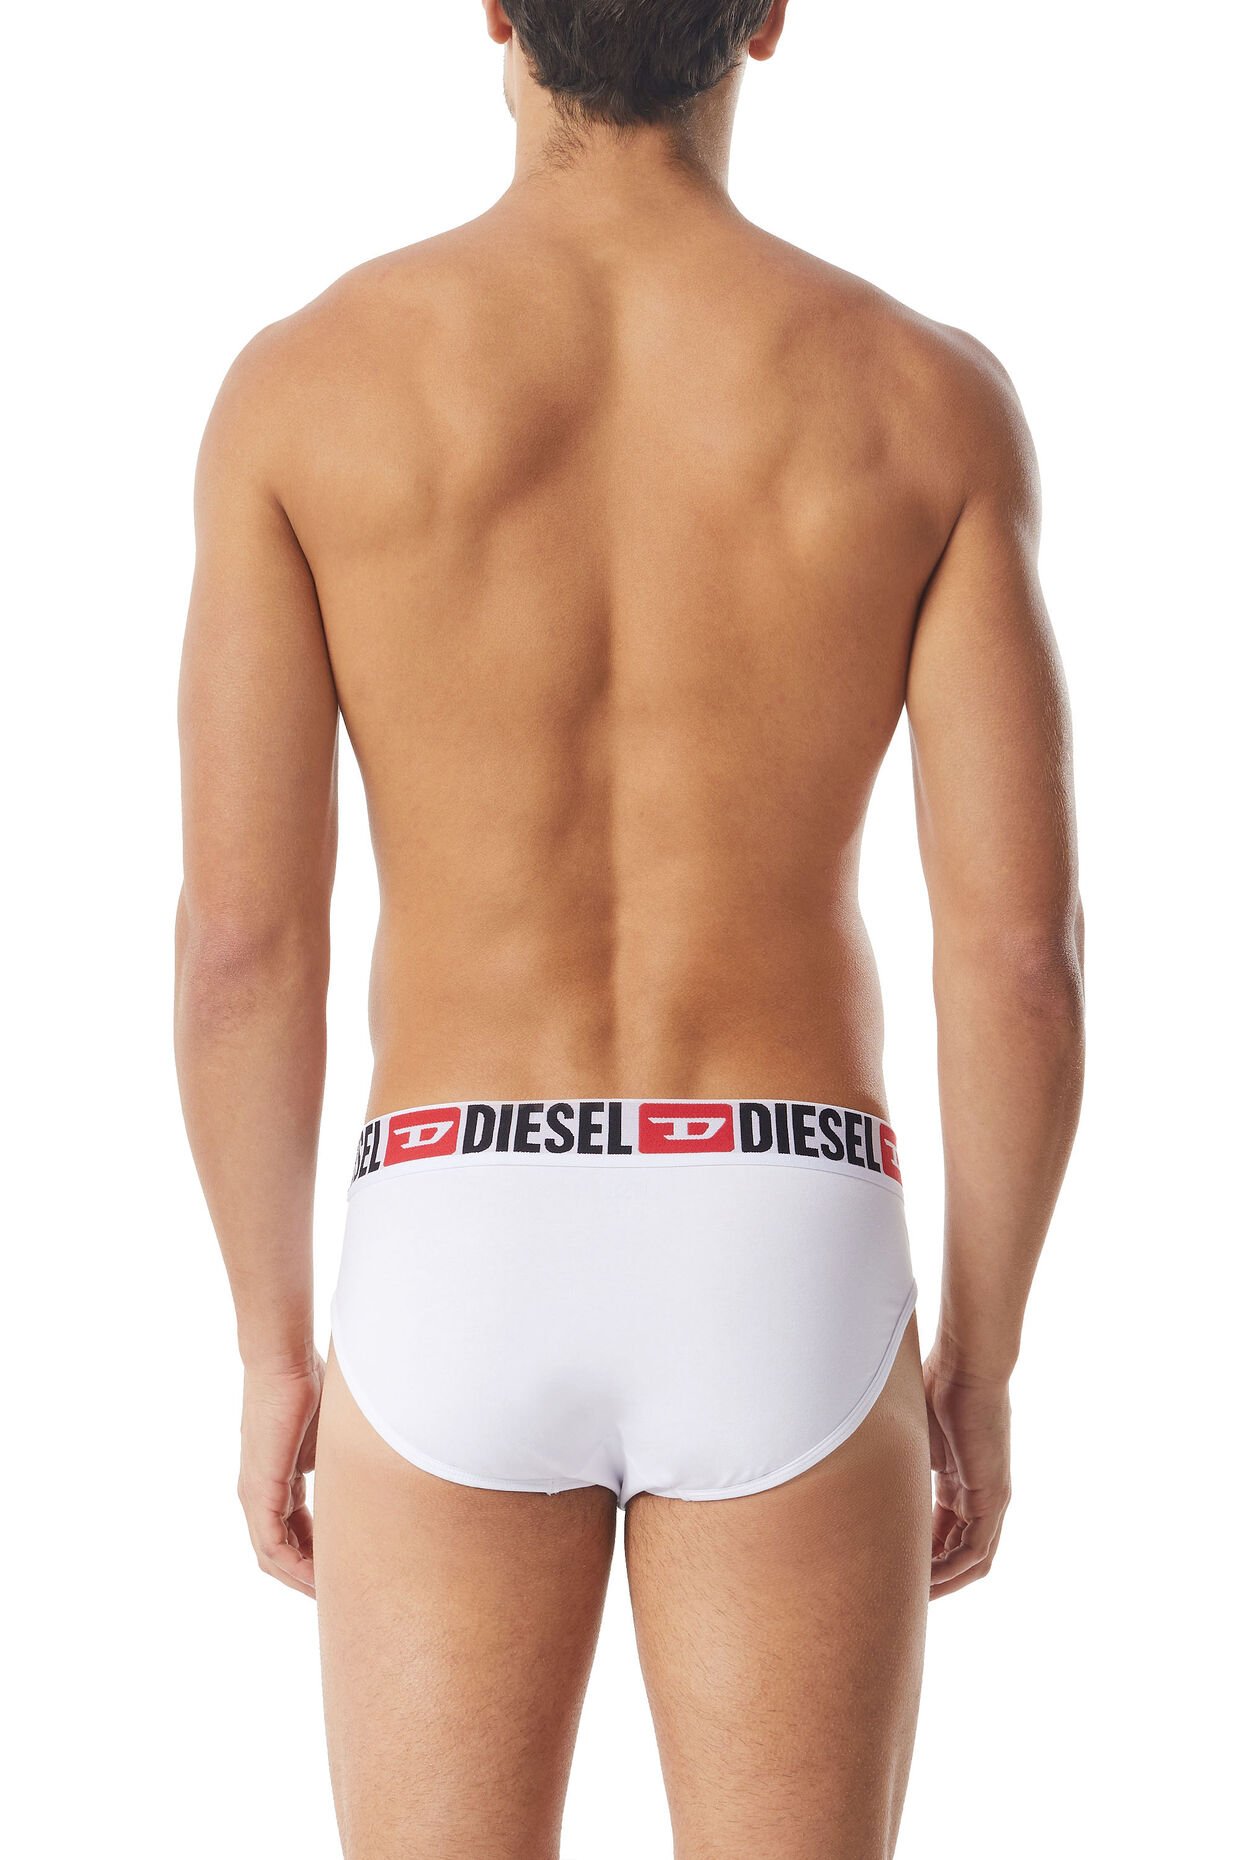 5 Best Low Rise Briefs for Men in 2023 The Ultimate Guide to Low Rise  Briefs — DAPPER & GROOMED